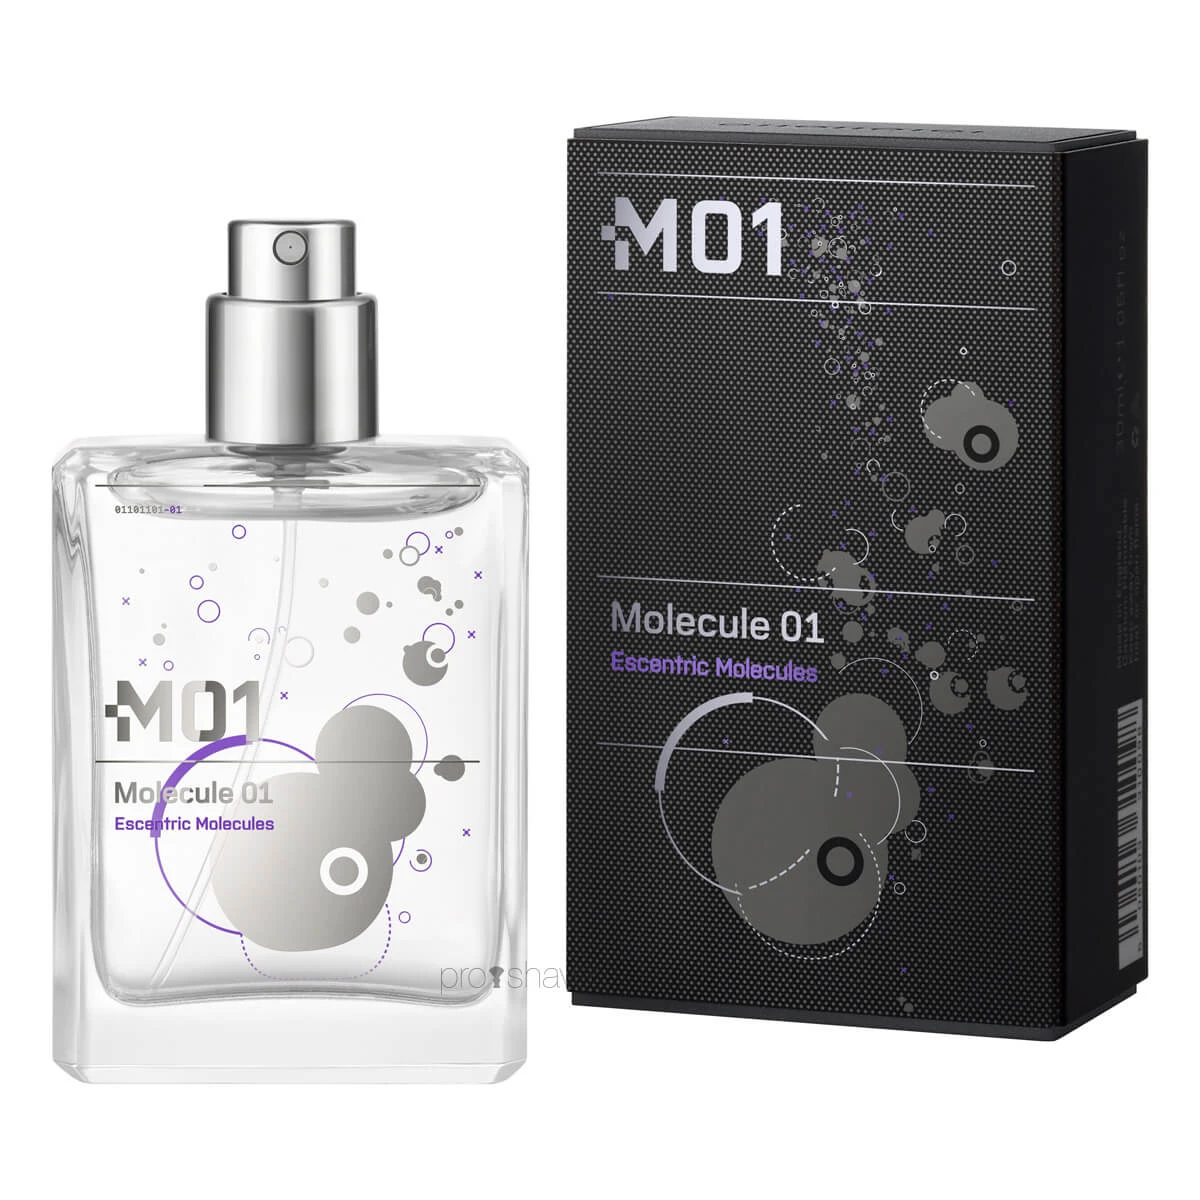 Kvinde gevinst Fearless Scent Molecule 01 - The ultimate scent from Escentric Molecules